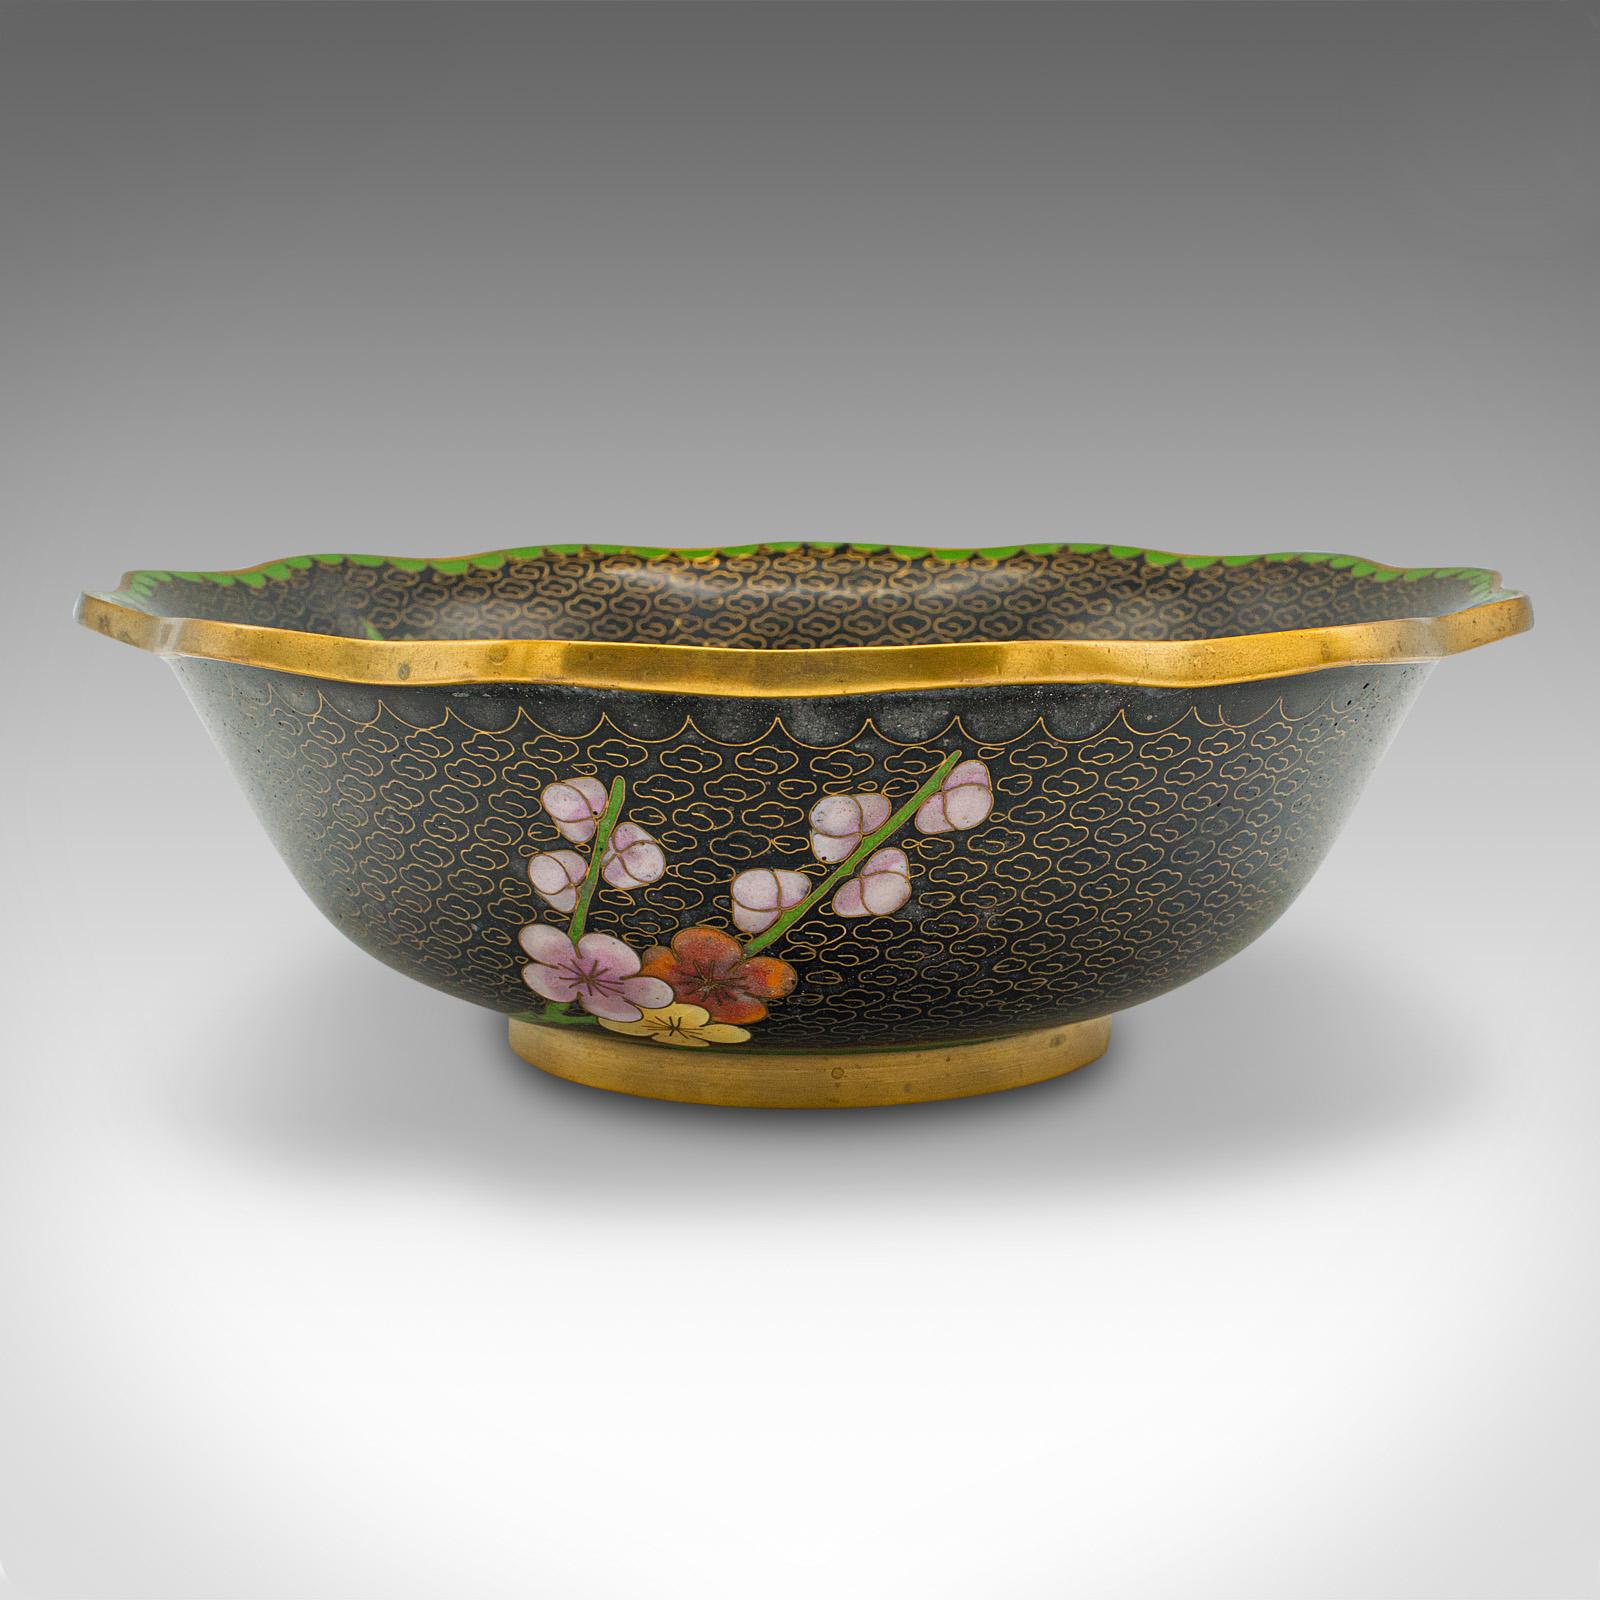 This is an antique decorative bowl. A Japanese, cloisonne bonbon or grape dish, dating to the early 20th century, circa 1920.

Delightful cloisonne decor with vibrant colours
Displays a desirable aged patina and in good order
Quality cloisonne